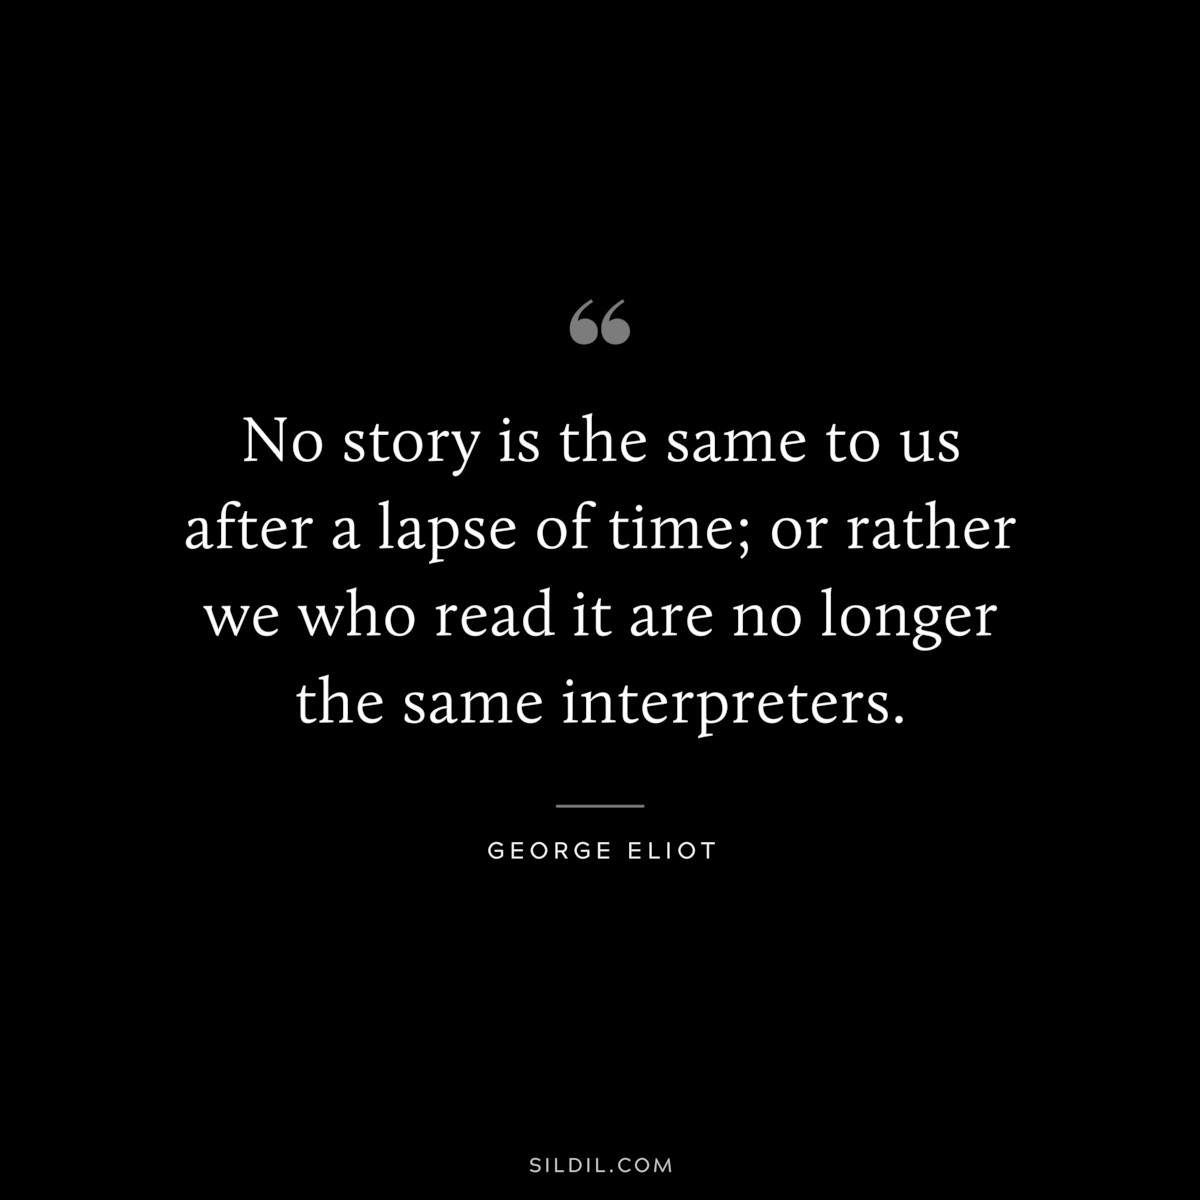 No story is the same to us after a lapse of time; or rather we who read it are no longer the same interpreters. ― George Eliot